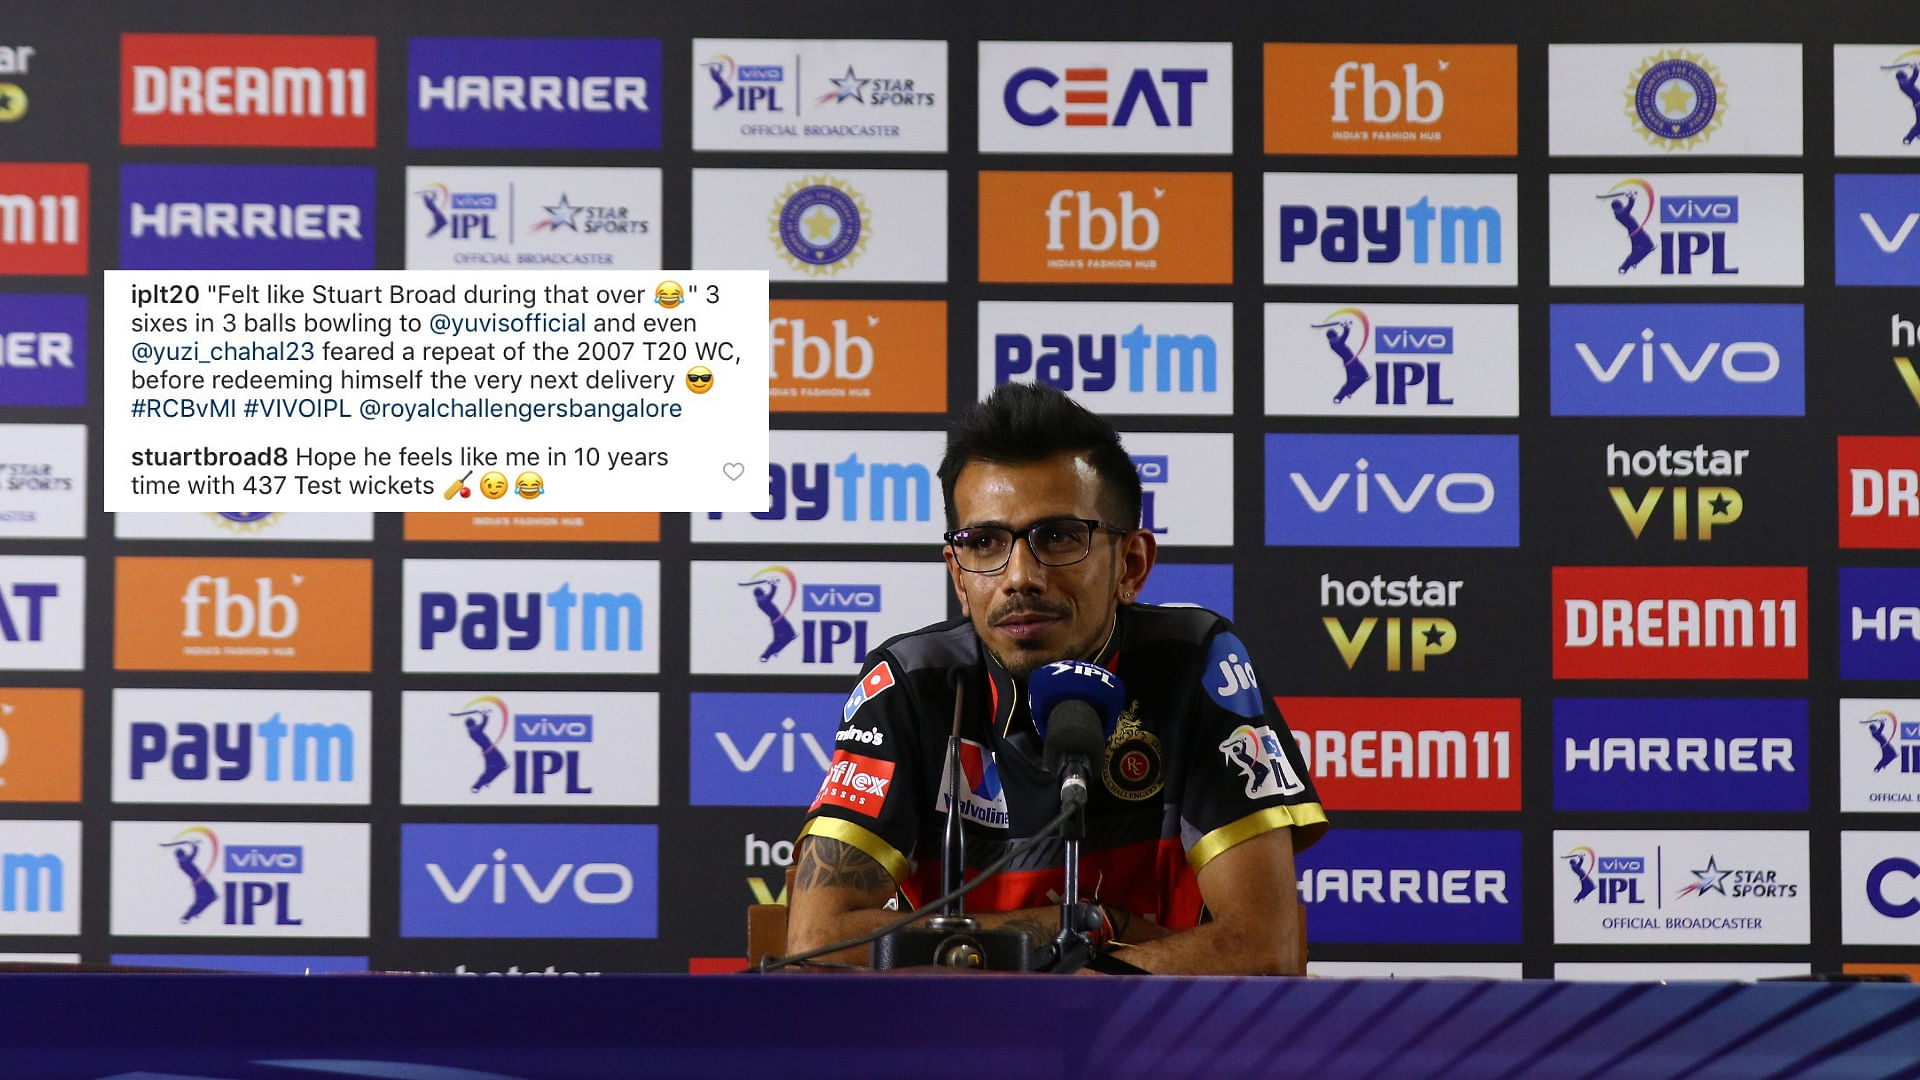 Yuzvendra Chahal was trolled by Stuart Broad over his comment on Yuvraj Singh’s three sixes in IPL 2019 MI vs RCB match on Thursday, 28 March.&nbsp;